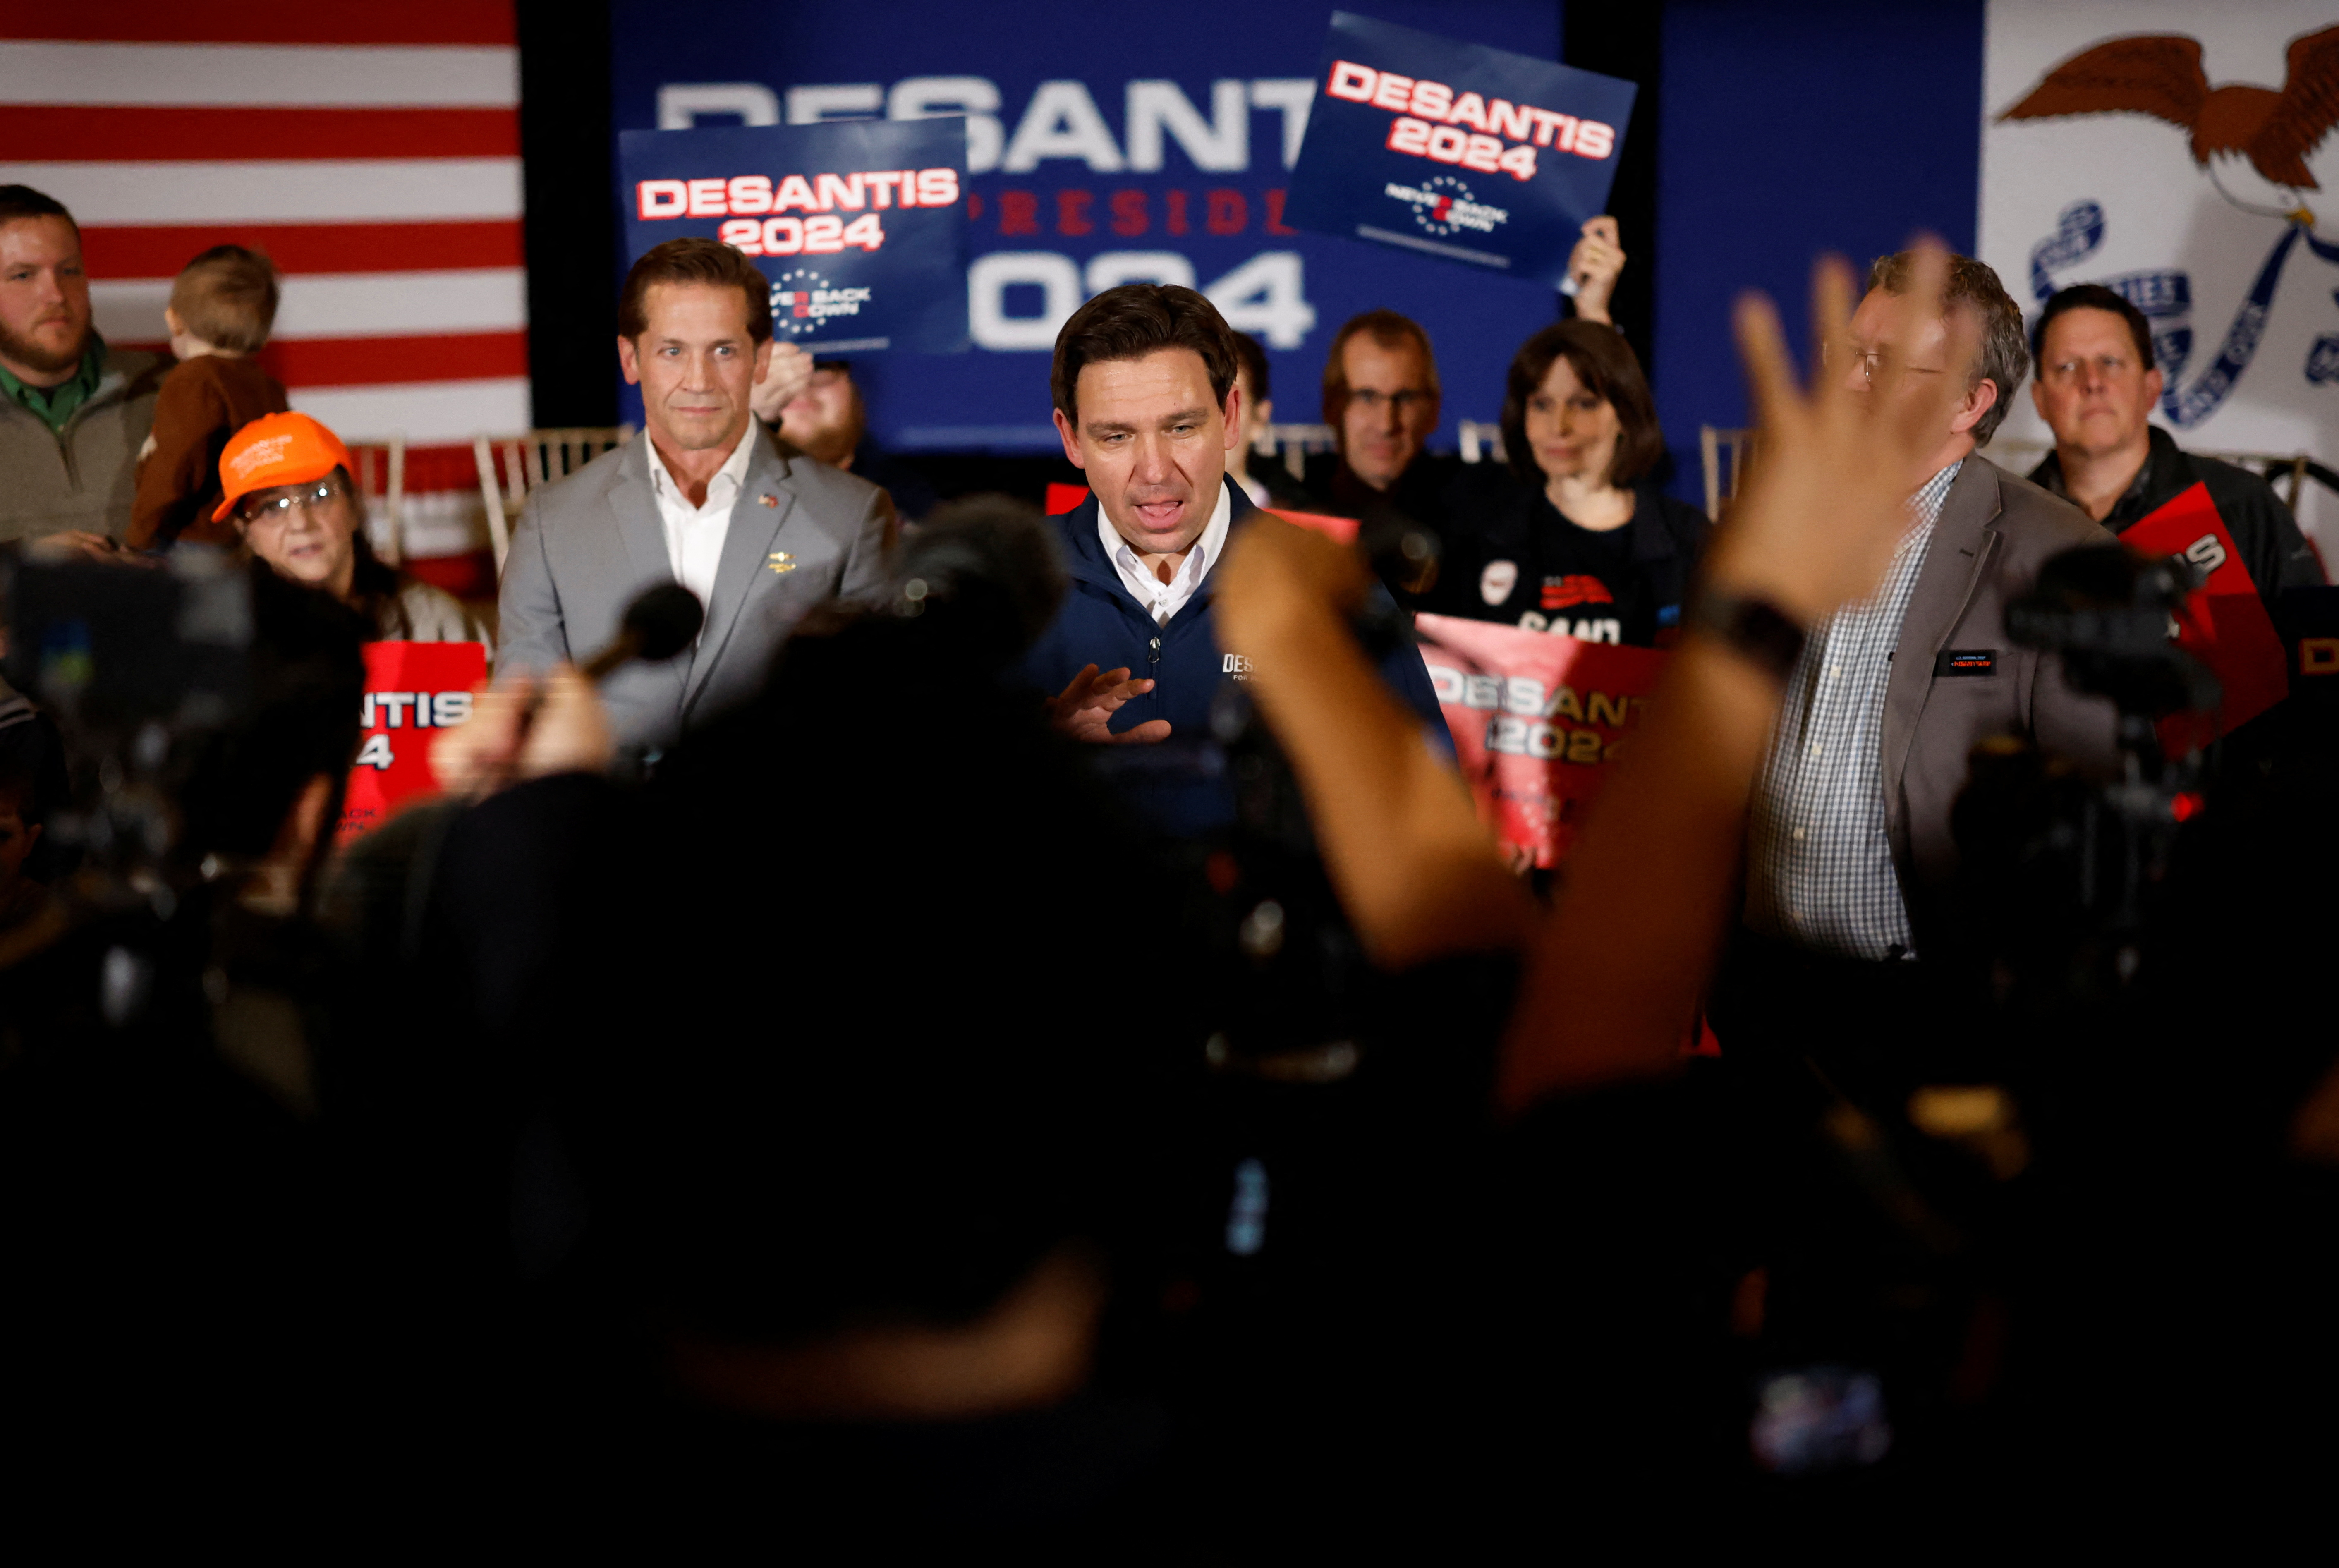 Republican presidential candidate and Florida Governor Ron DeSantis campaigns in Ankeny